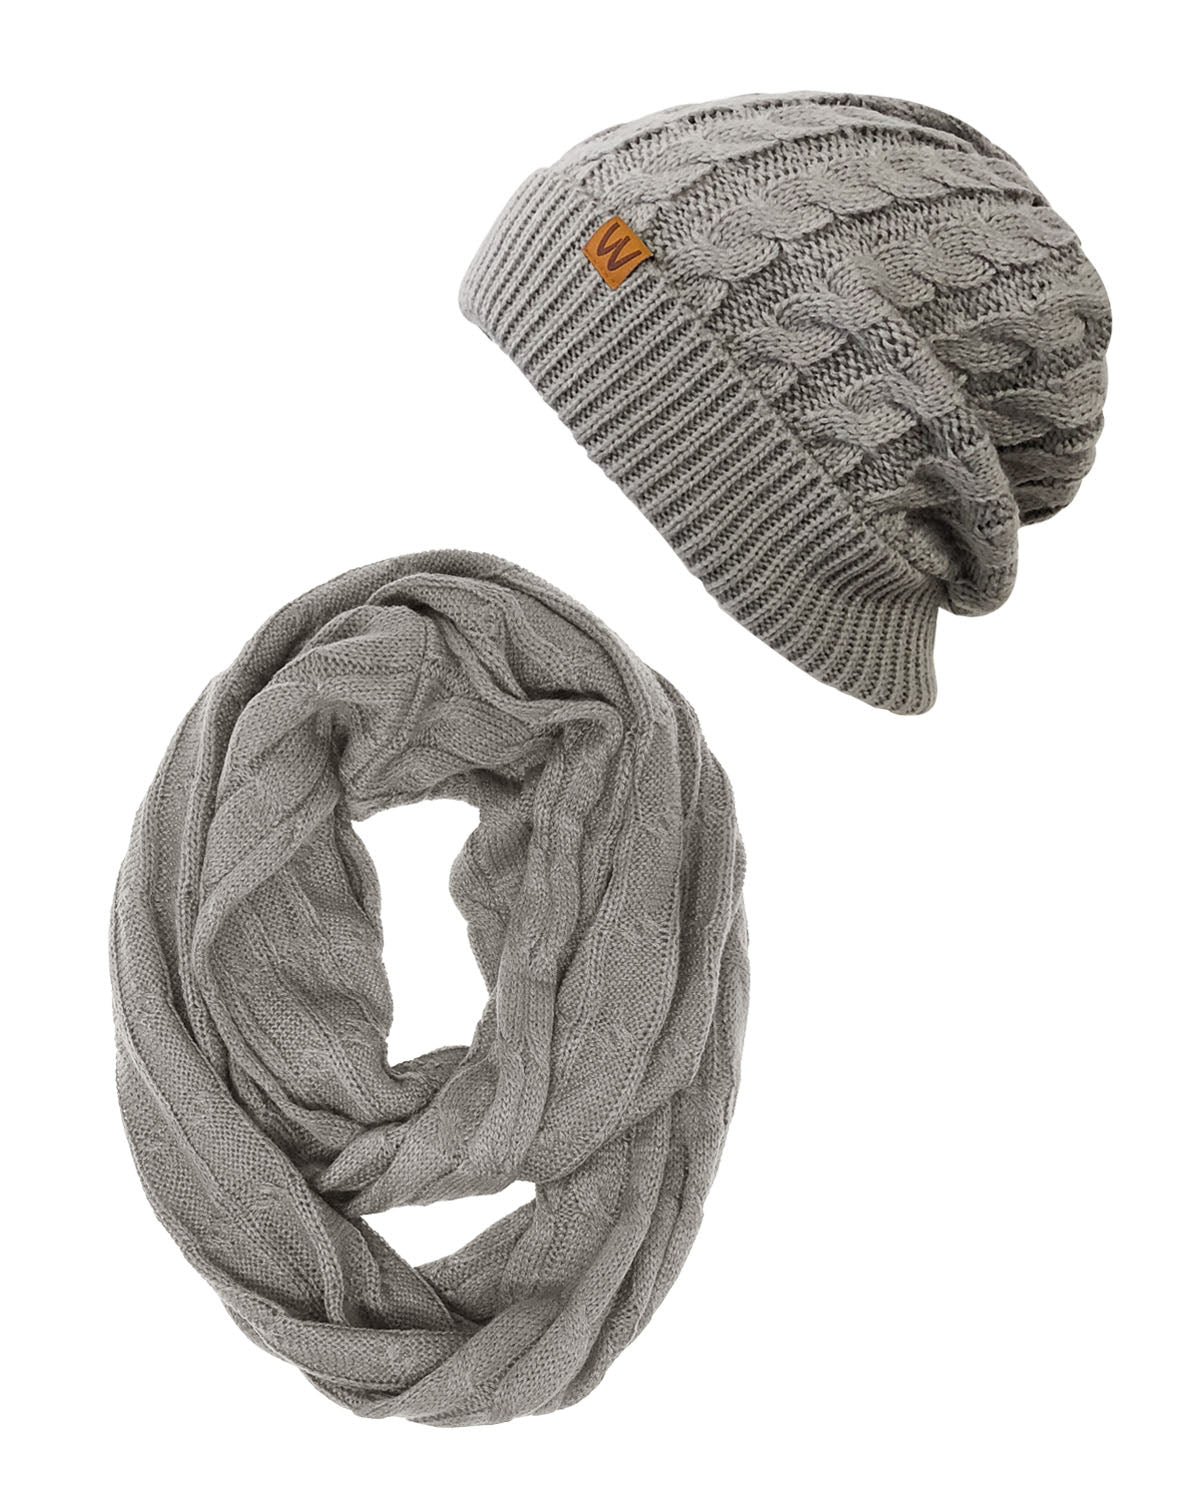 Wrapables Winter Warm Cable Knit Infinity Scarf and Beanie Set